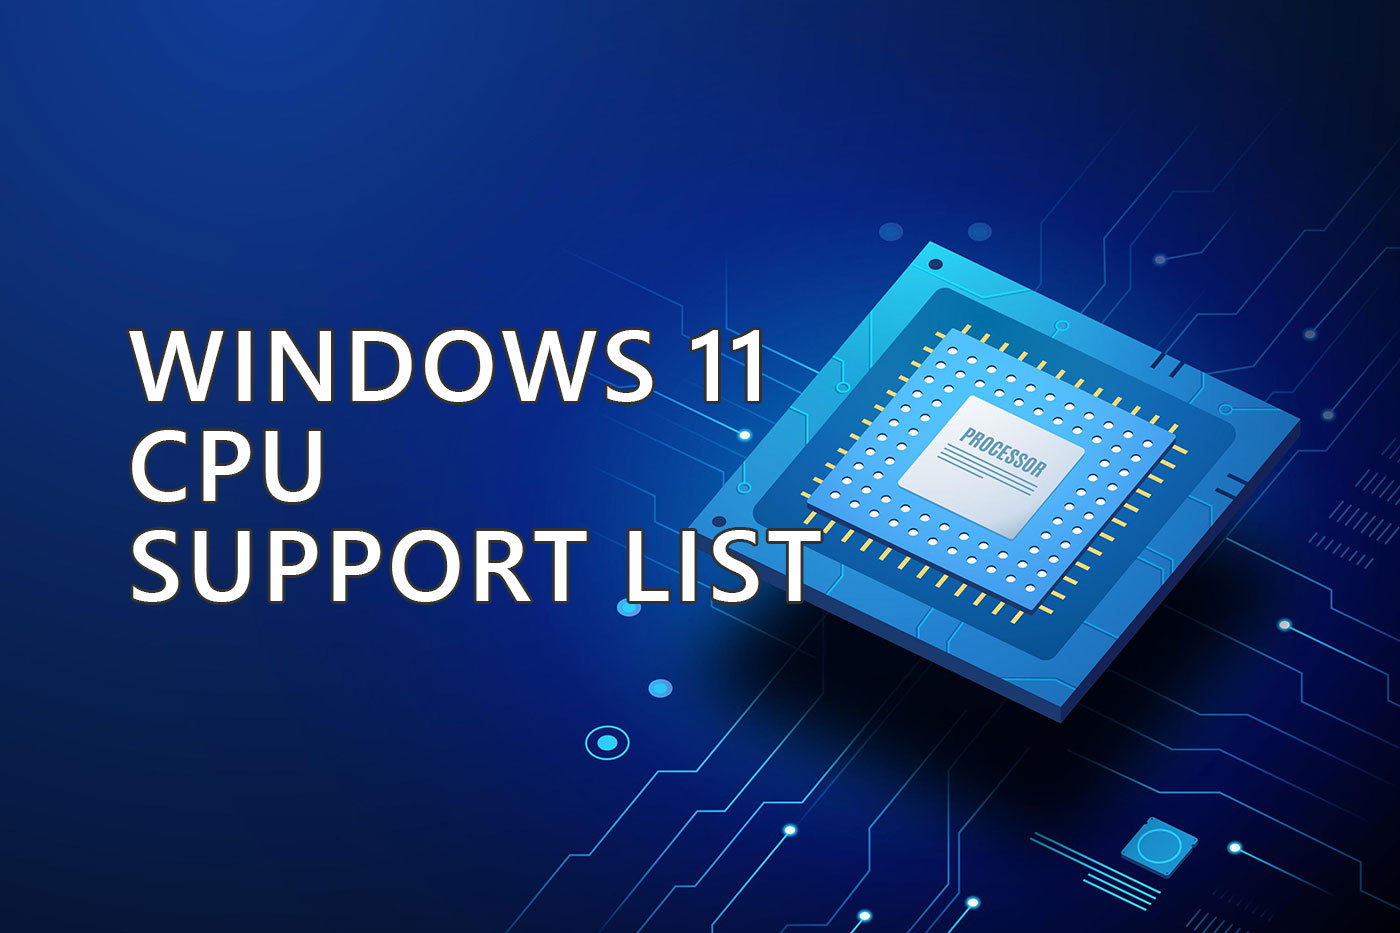 Microsoft ends support for dozens of Intel processors in latest Windows 11 system requirements update